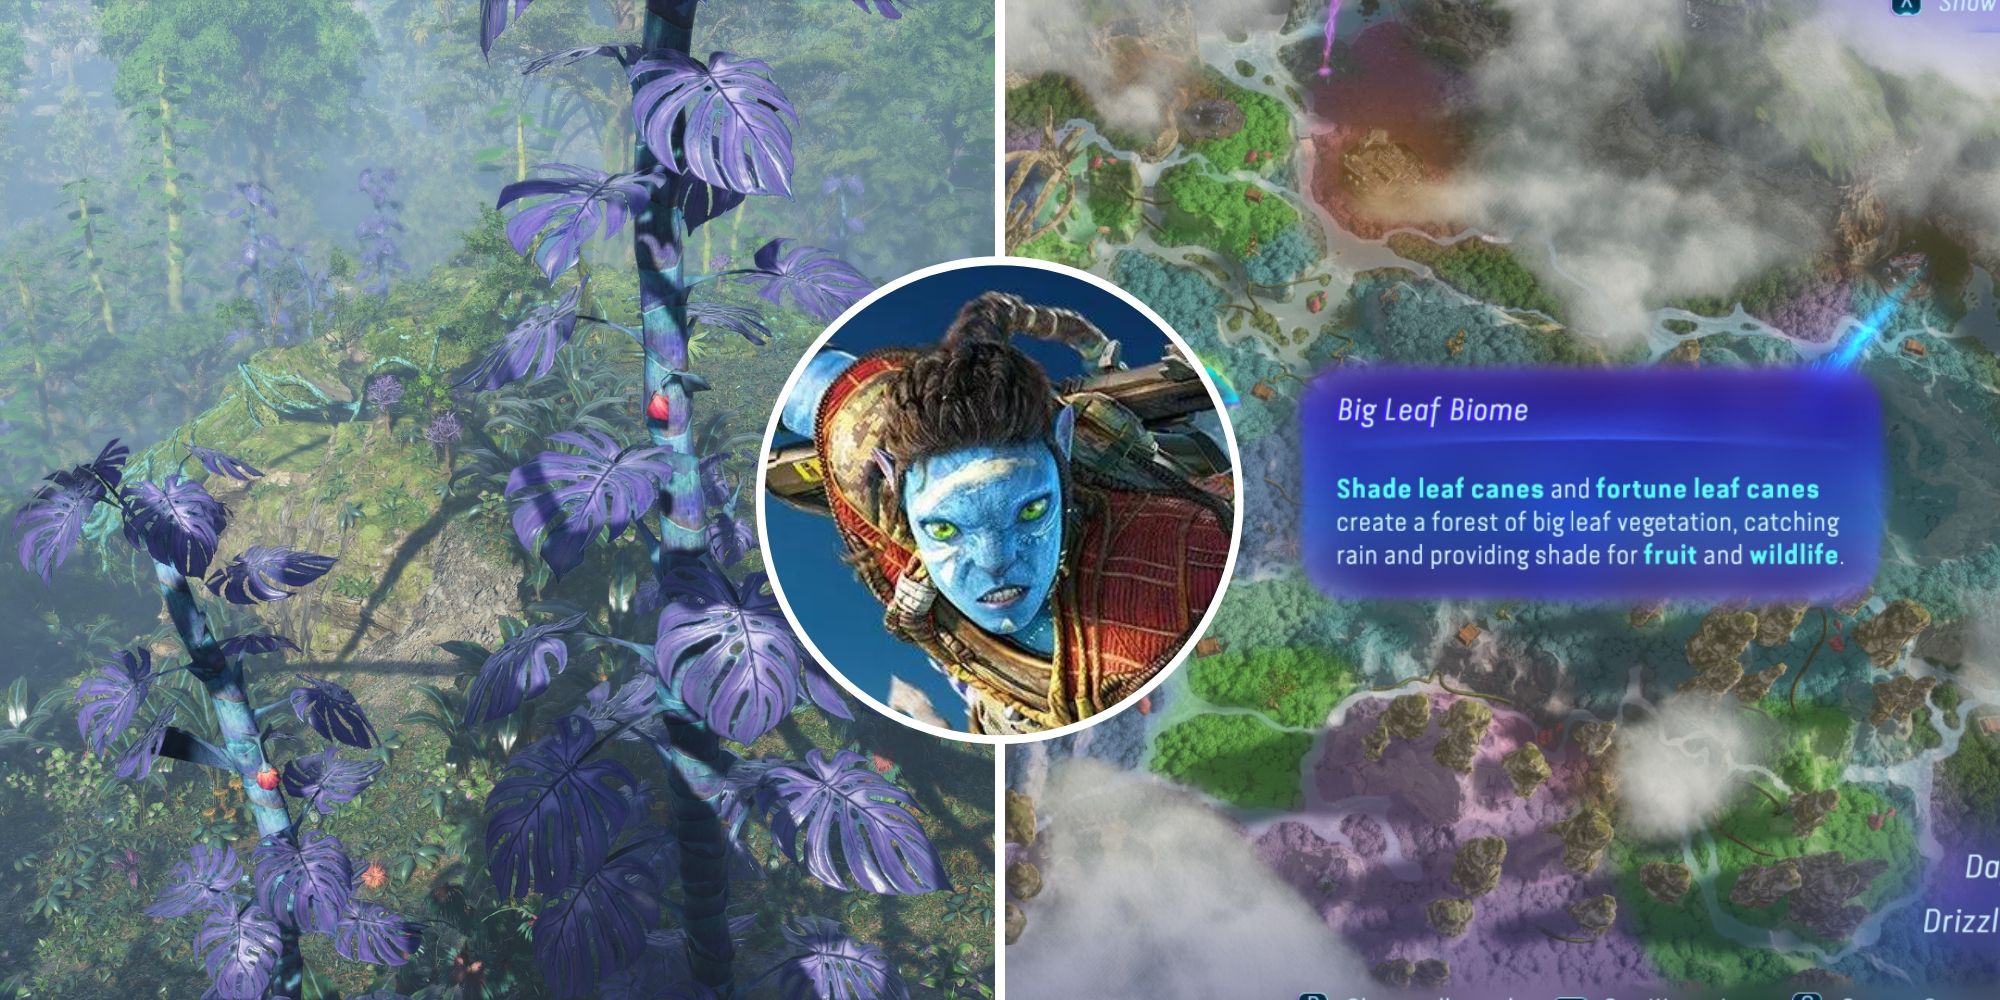 Avatar Frontiers Of Pandora - Where To Find Fortune’s Fruit Feature Image